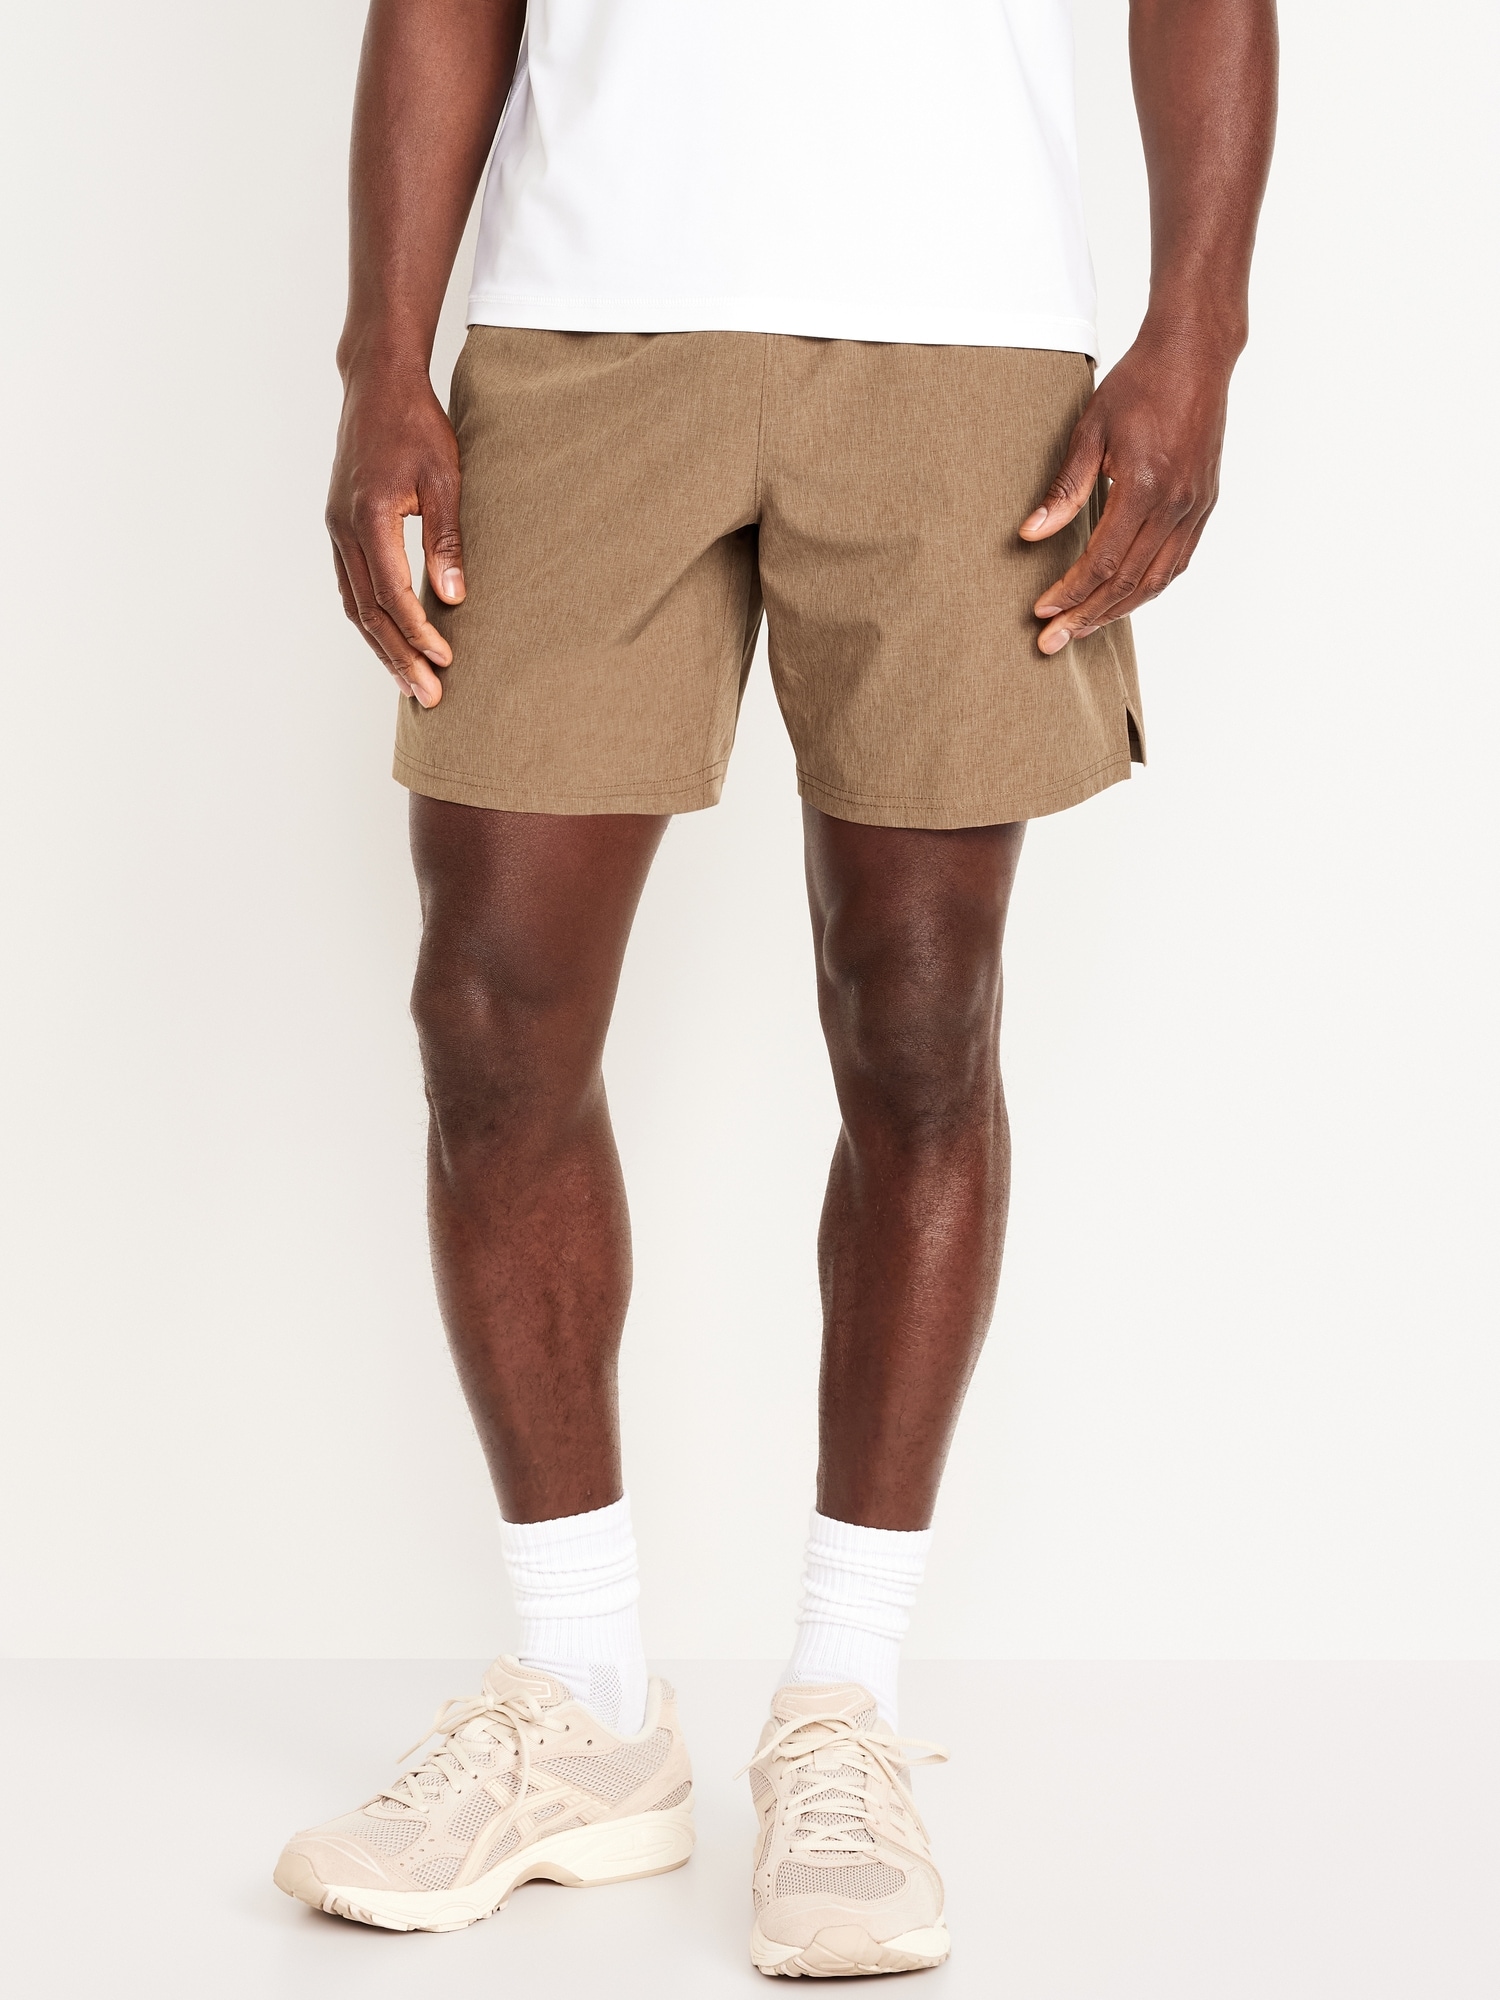 Essential Woven Workout Shorts -- 7-inch inseam